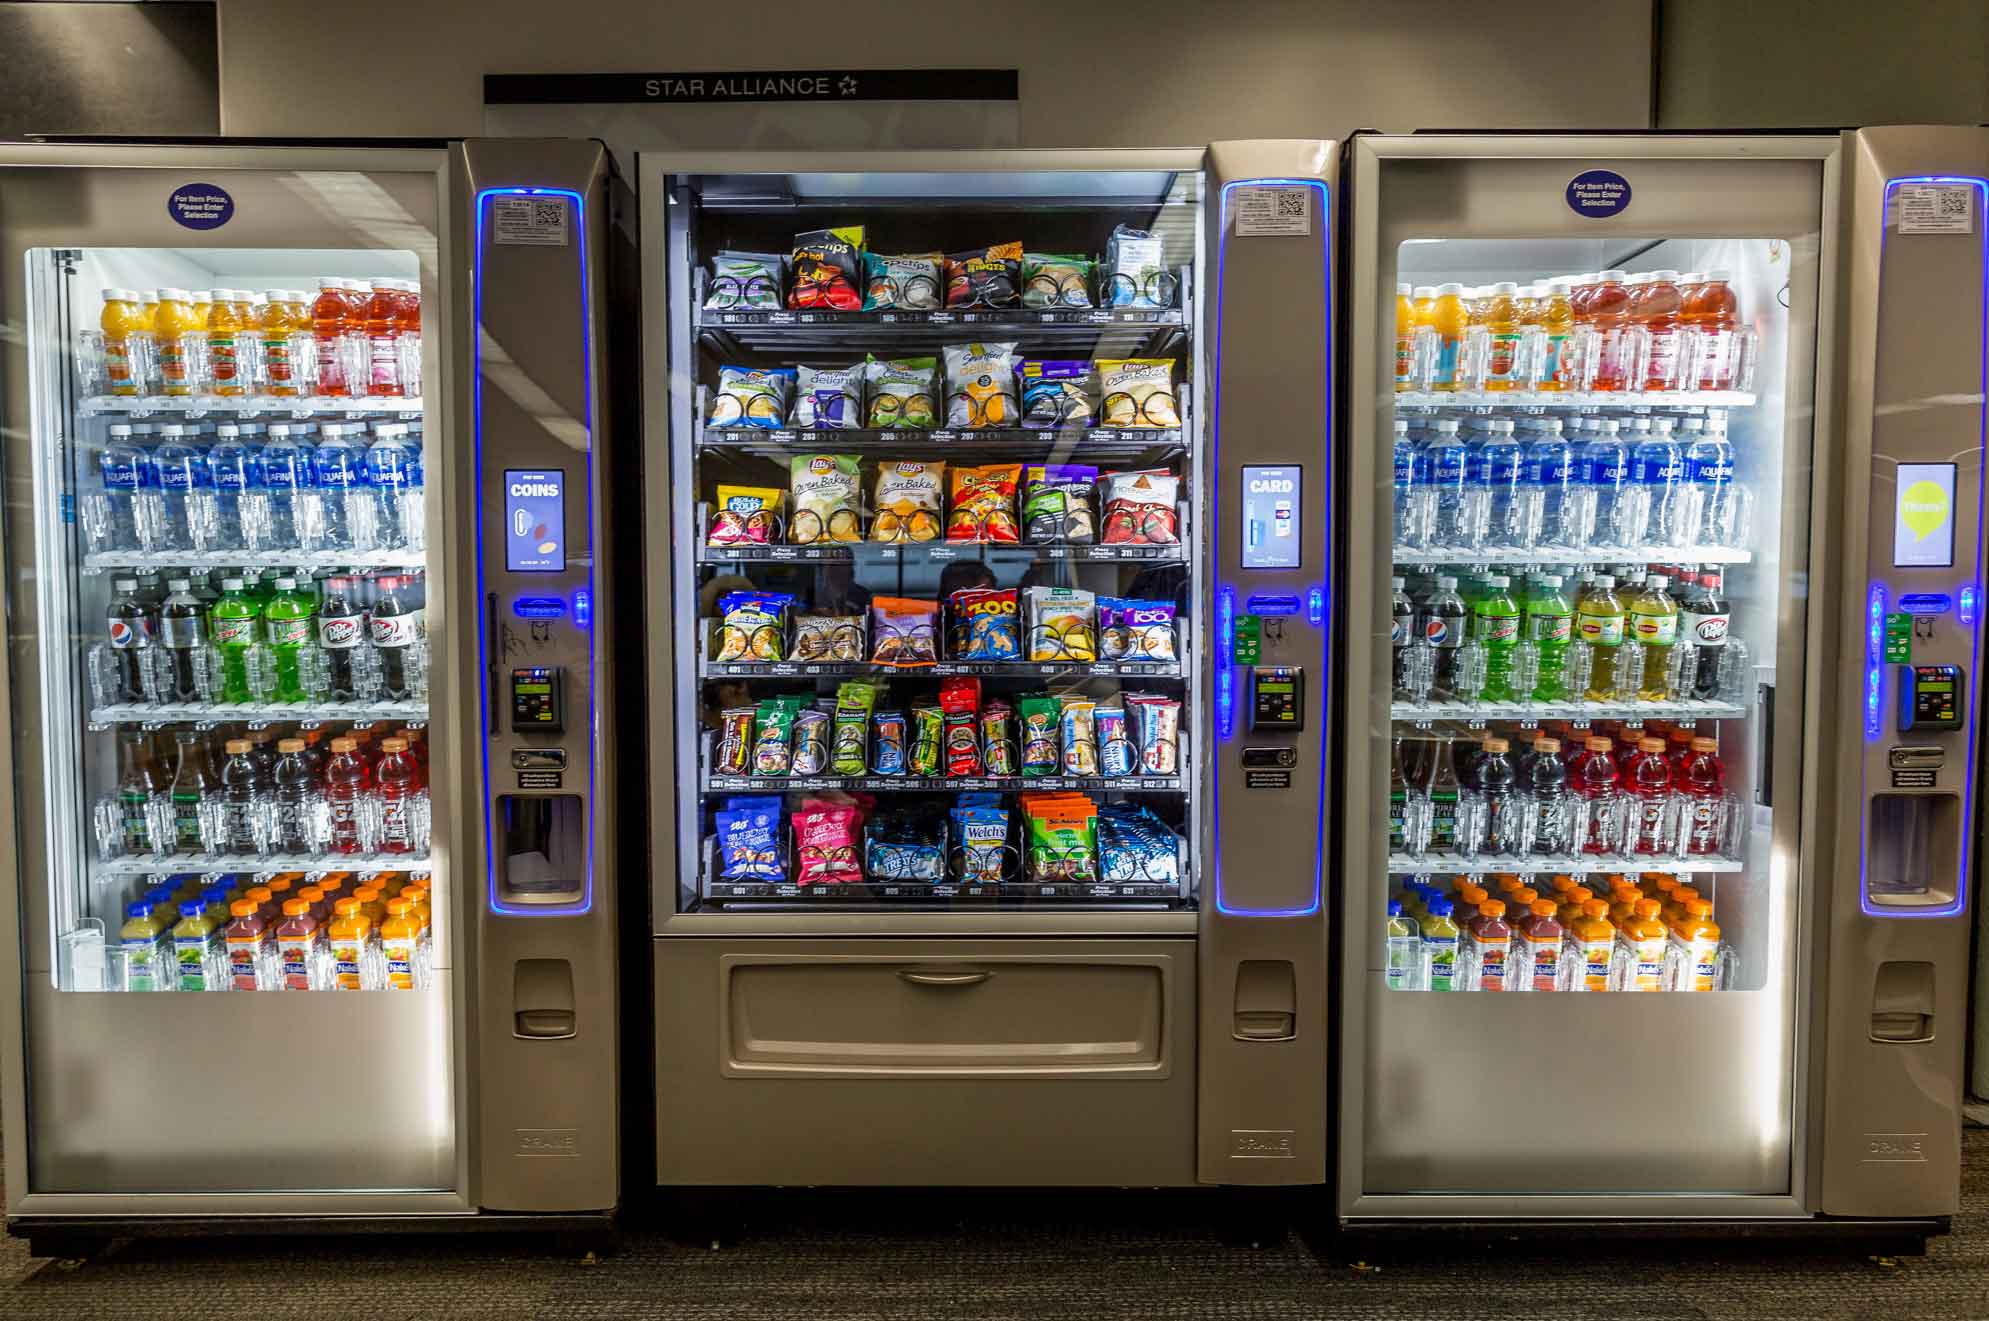 Is it breaking the Sabbath to purchase a drink from a vending machine?